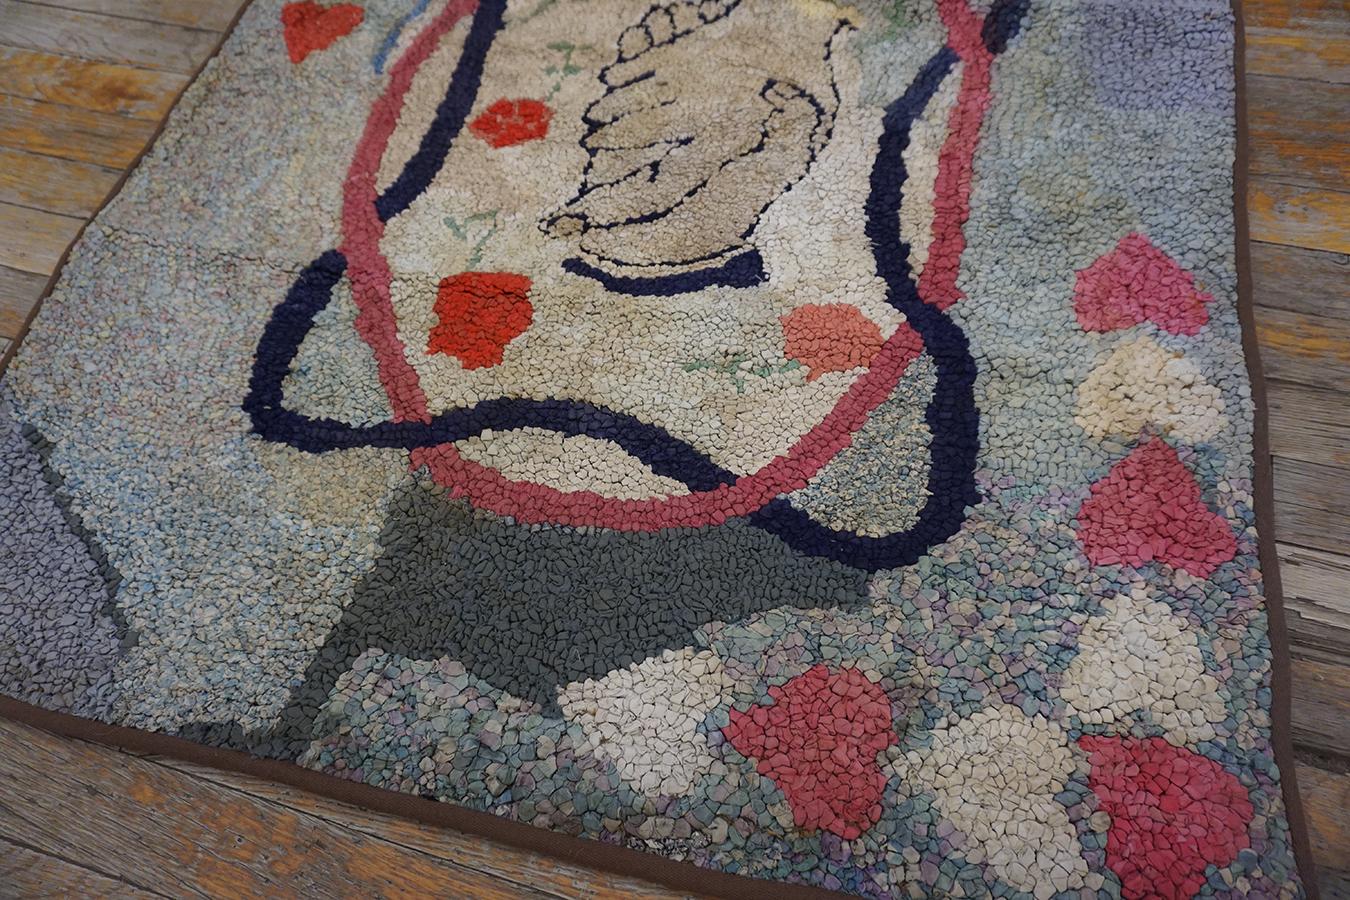 Early 20th Century American Hooked Rug ( 2'9